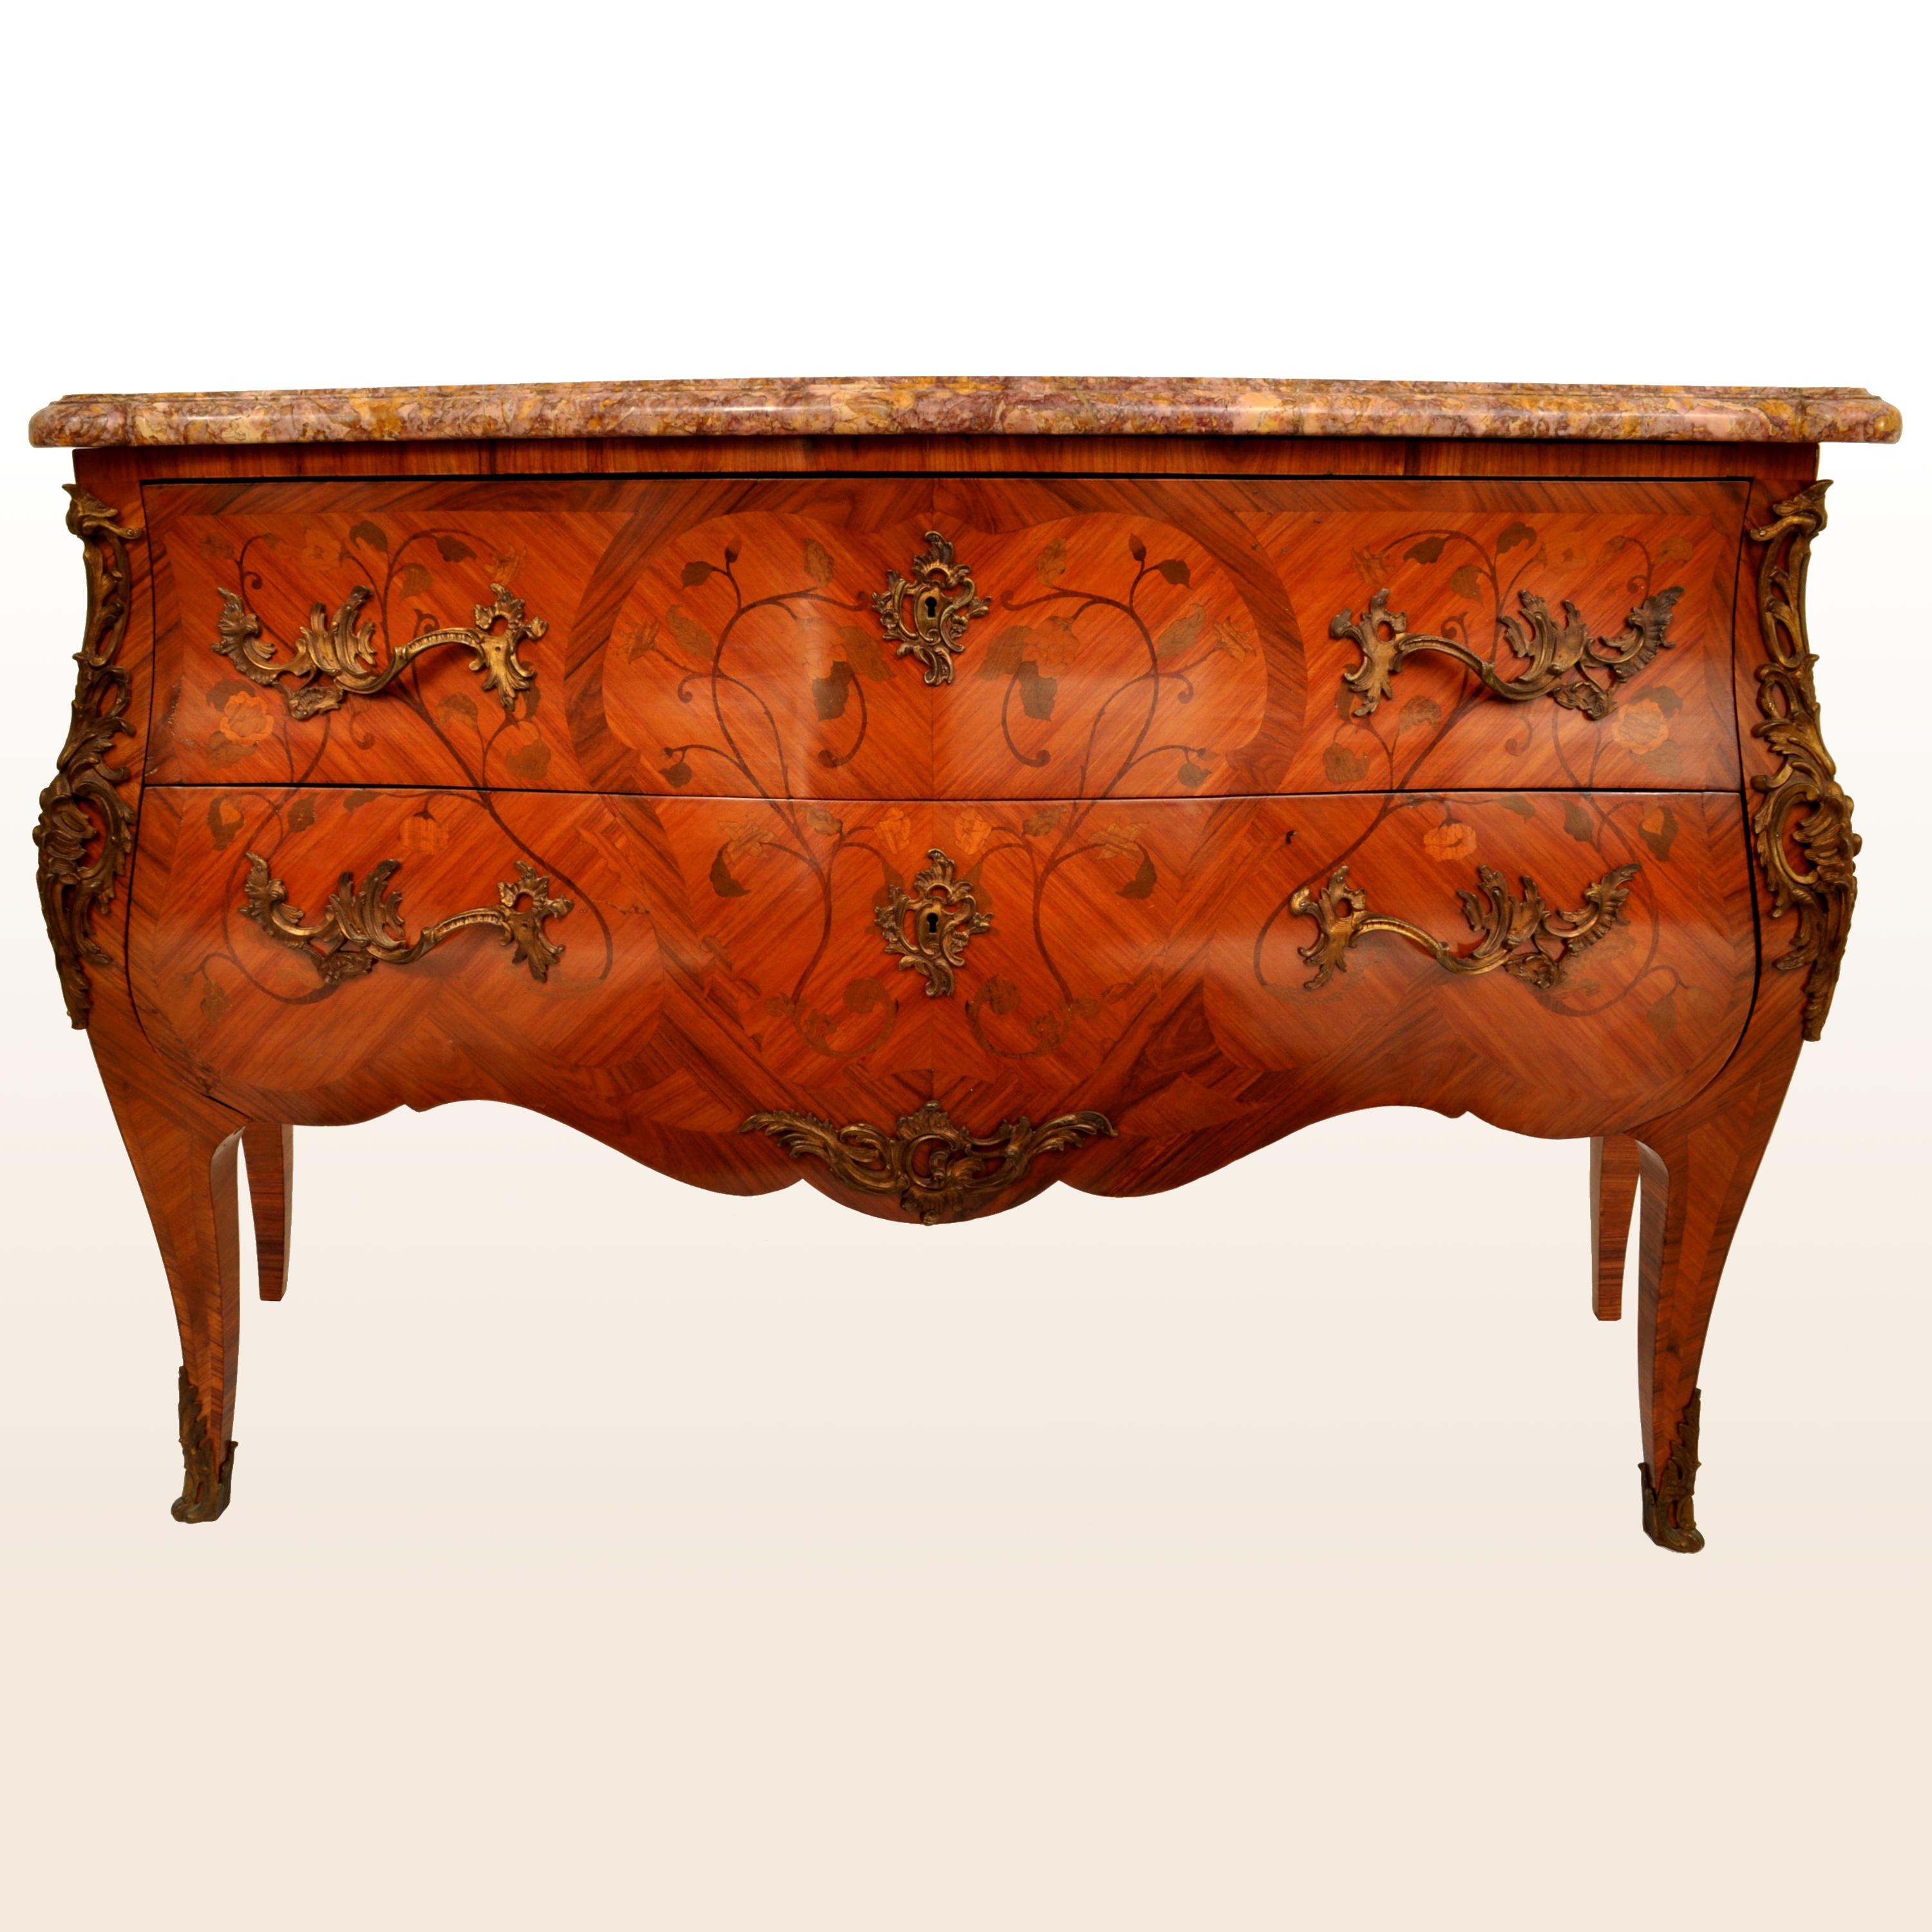 A spectacular antique French marble top Louis XV style marquetry walnut bombe shaped commode, circa 1880. 
The two drawer commode having a substantial variegated marble top, the chest made of cross-banded walnut of bombe form and sumptuously inlaid